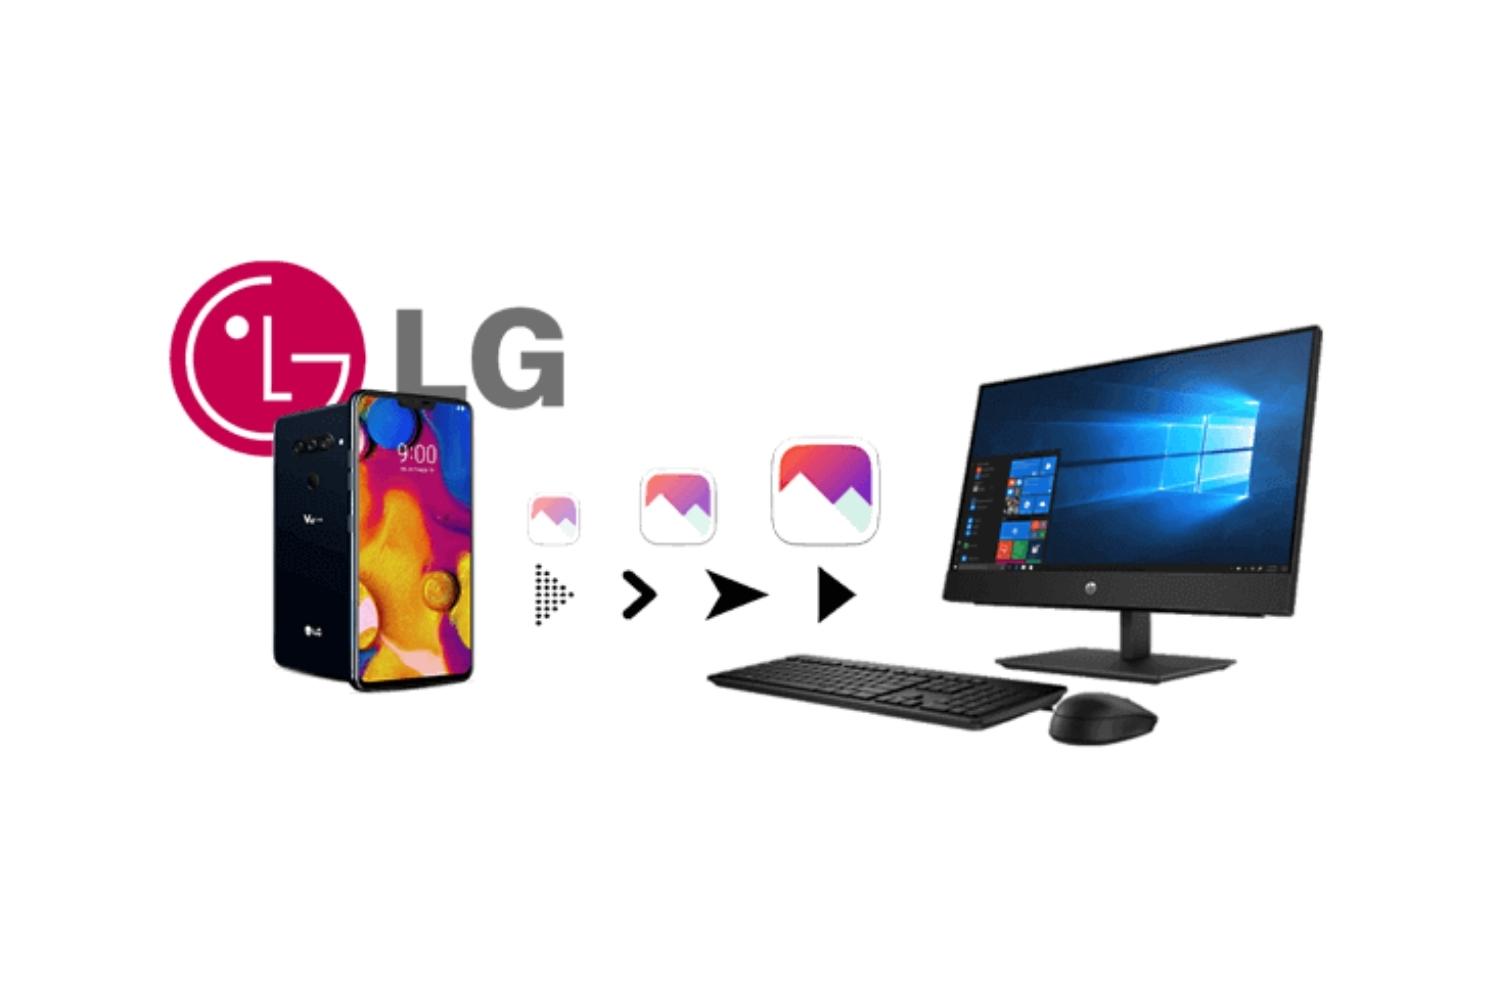 How To Transfer Photos From LG Tablet To PC